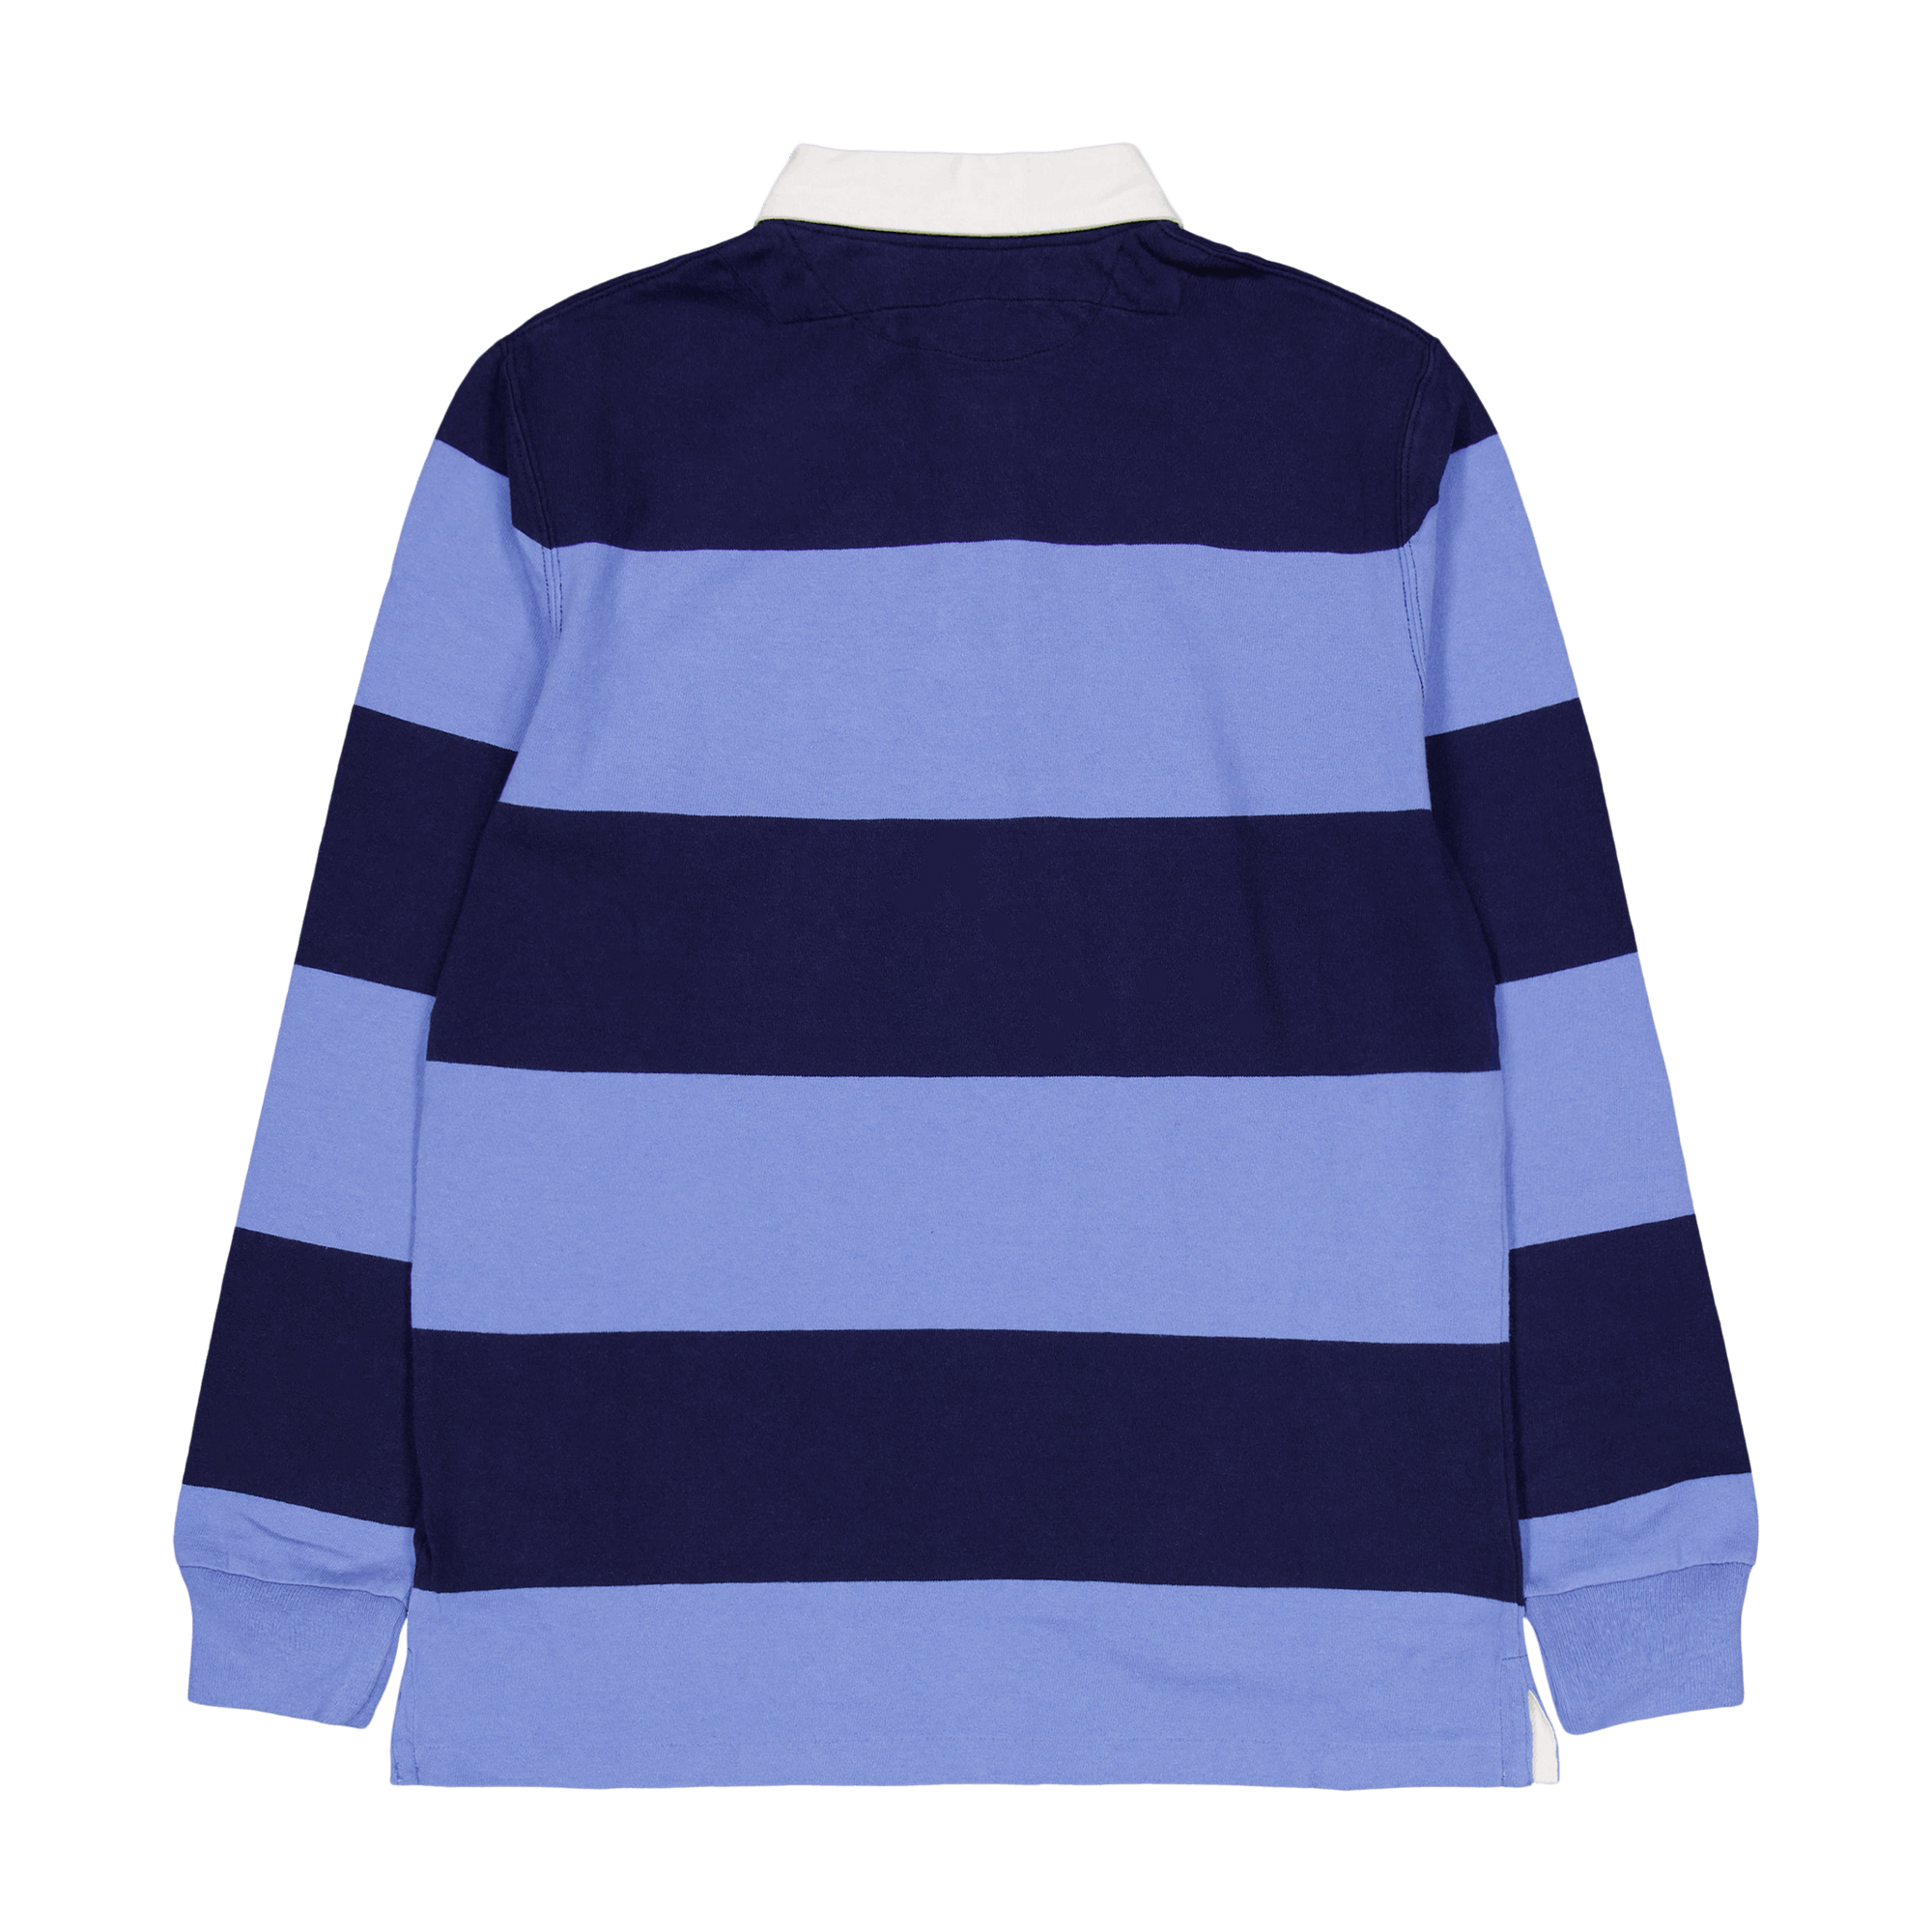 Classic Fit Striped Jersey Rugby Shirt Newport Navy Multi